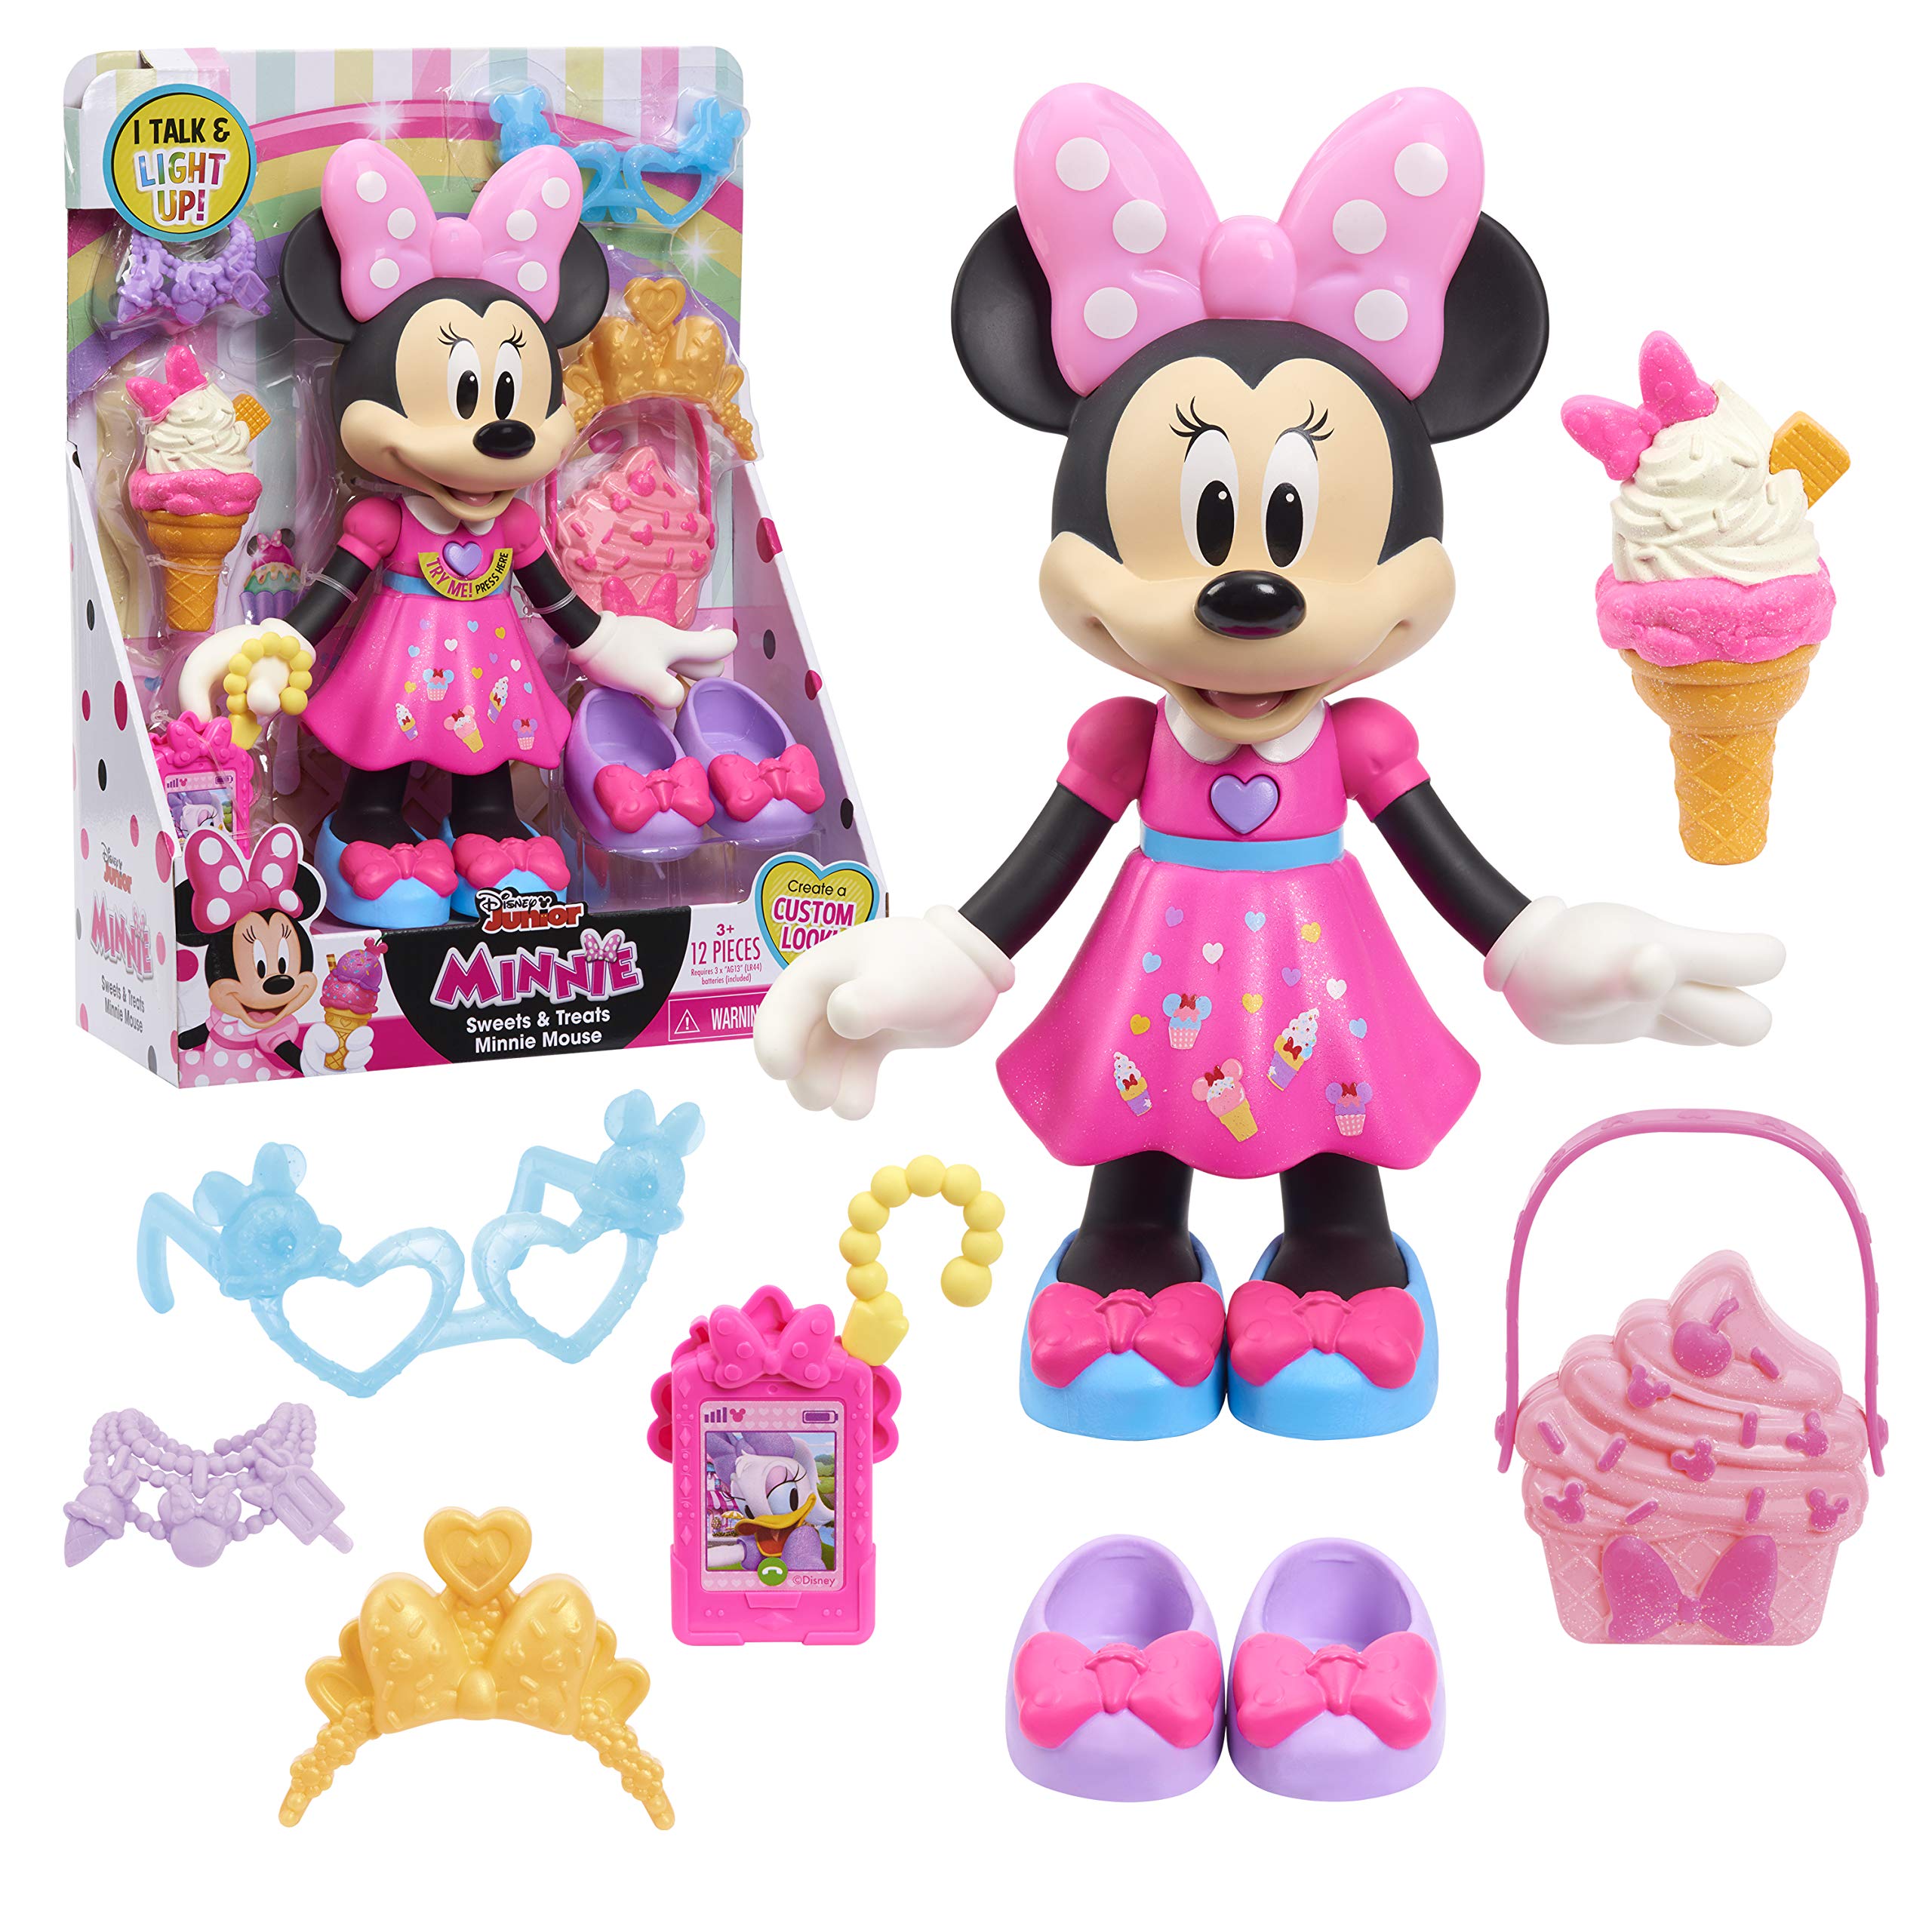 Just Play Disney Junior Sweets & Treats Minnie Mouse, Interactive 10-Inch Doll with Lights, Sounds, and Accessories, by Just Play